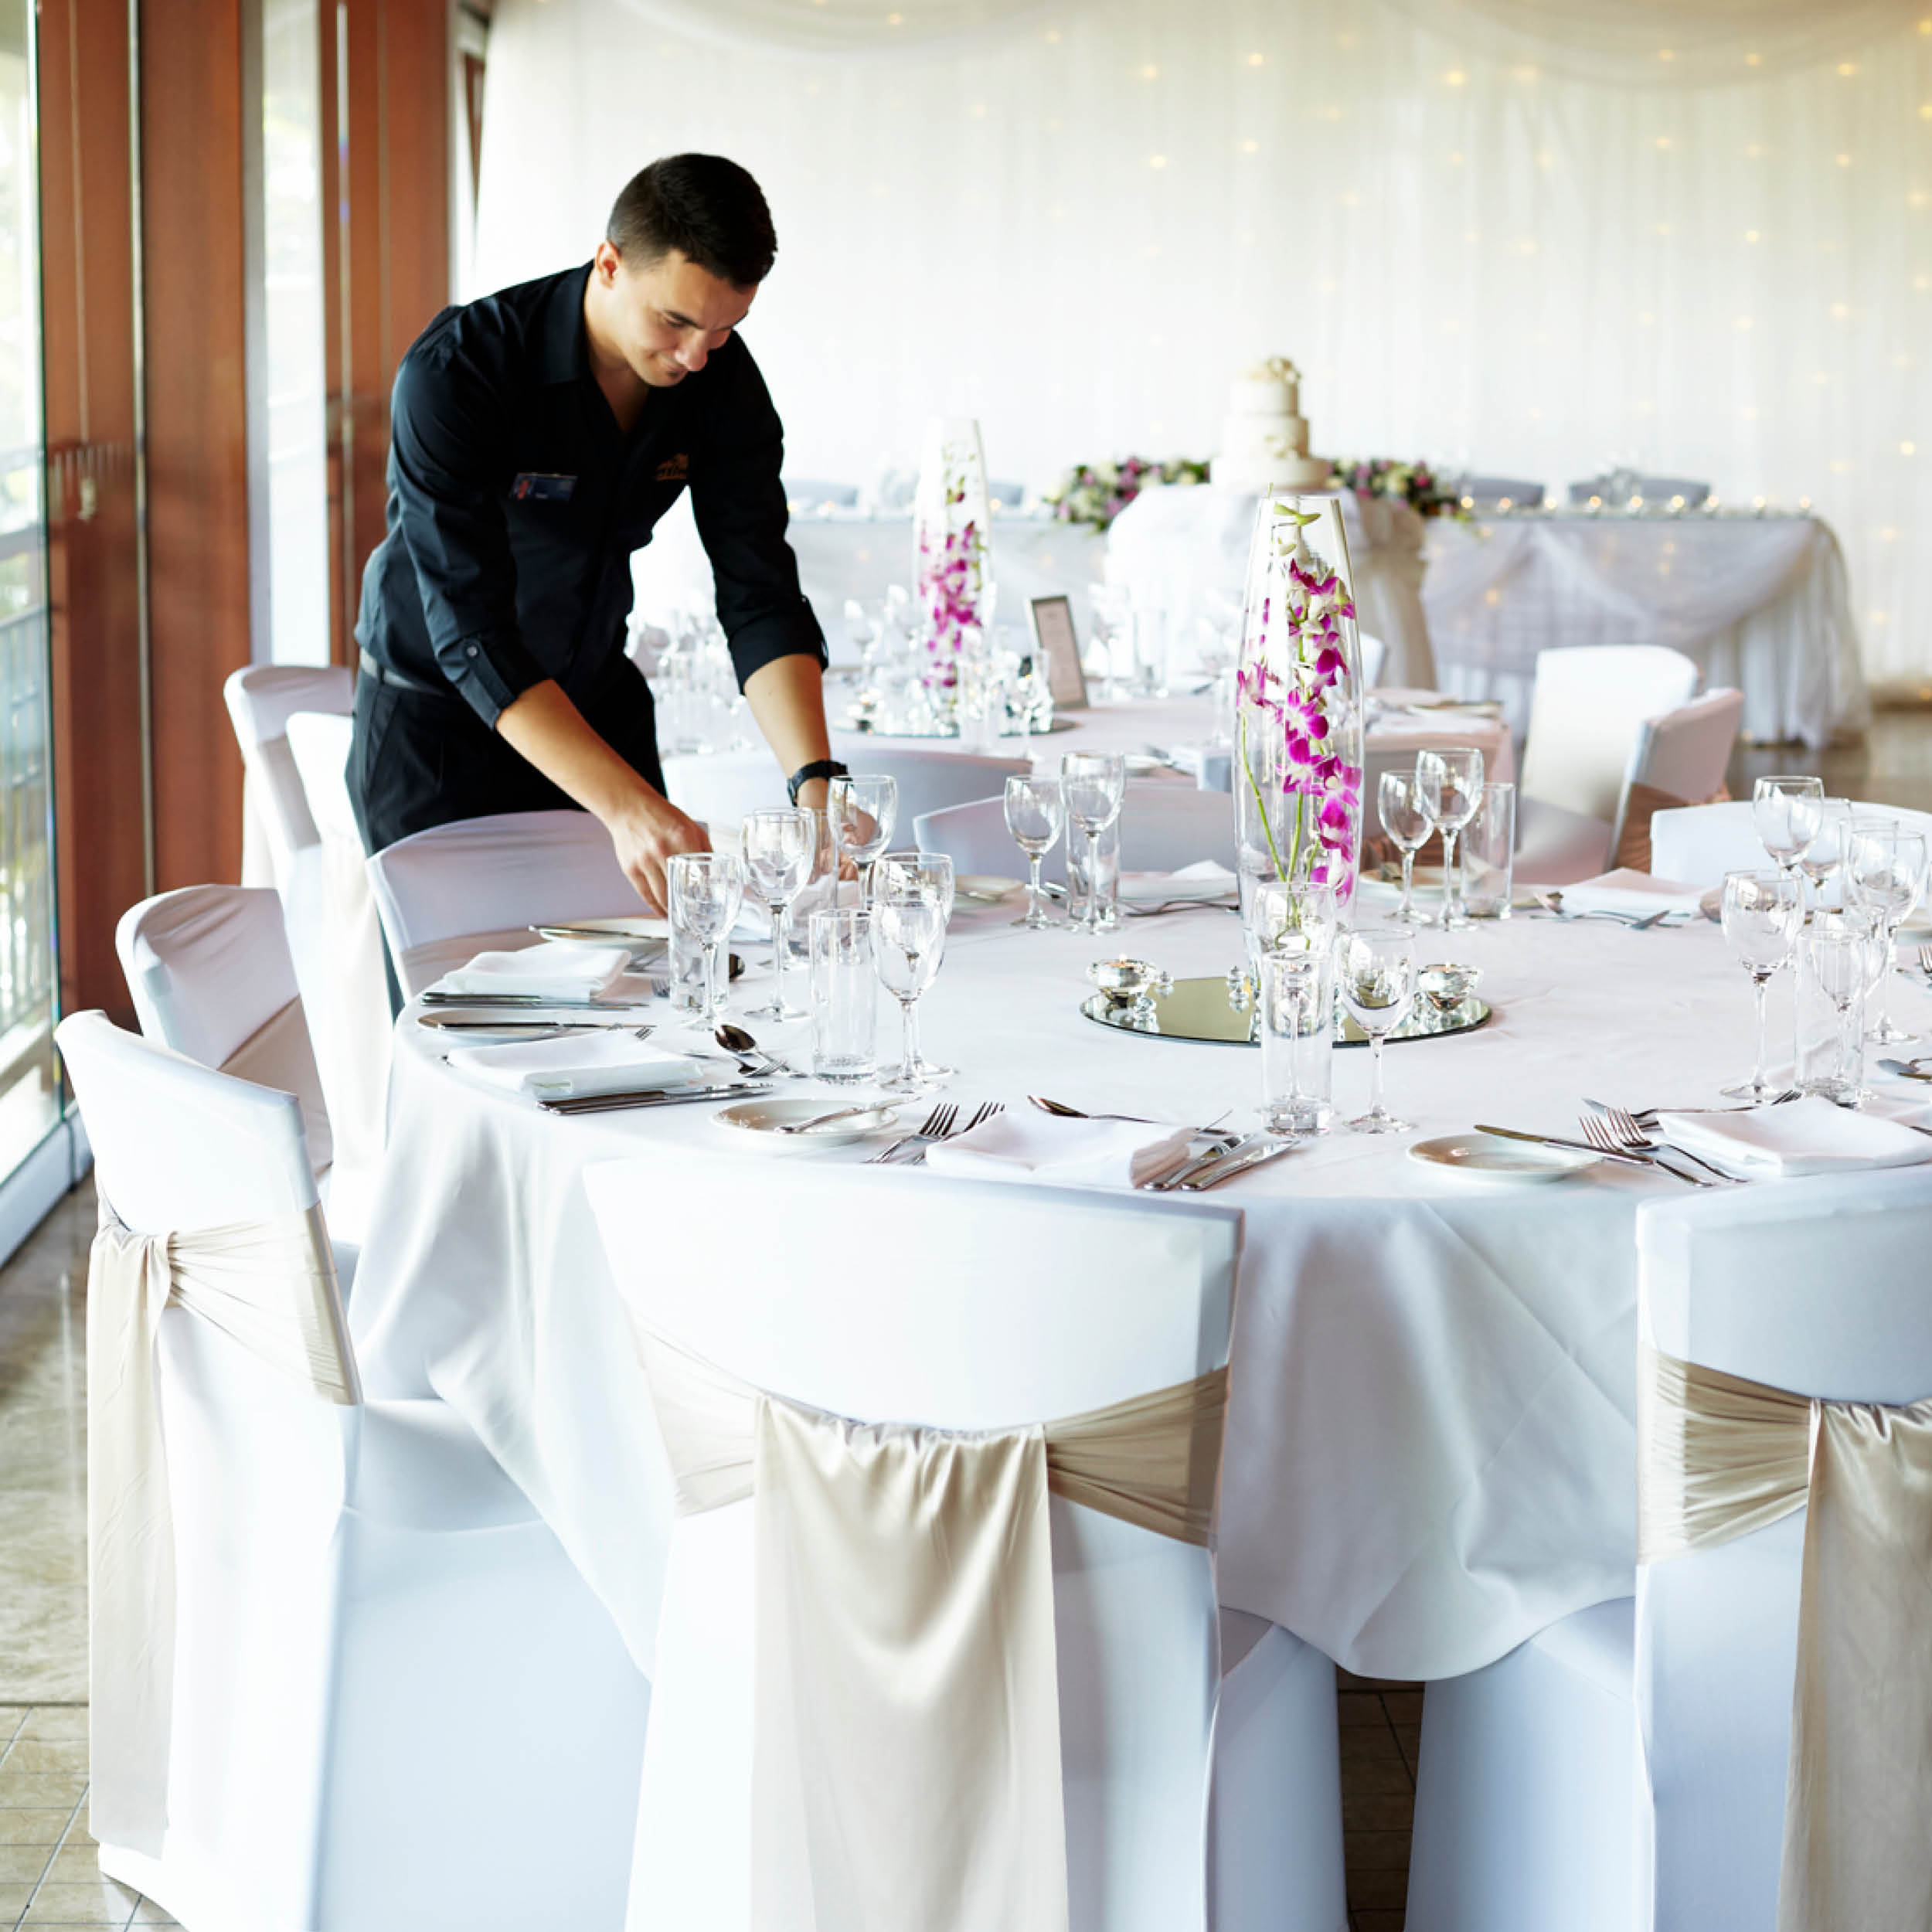 Function staff setting up table setting for private function